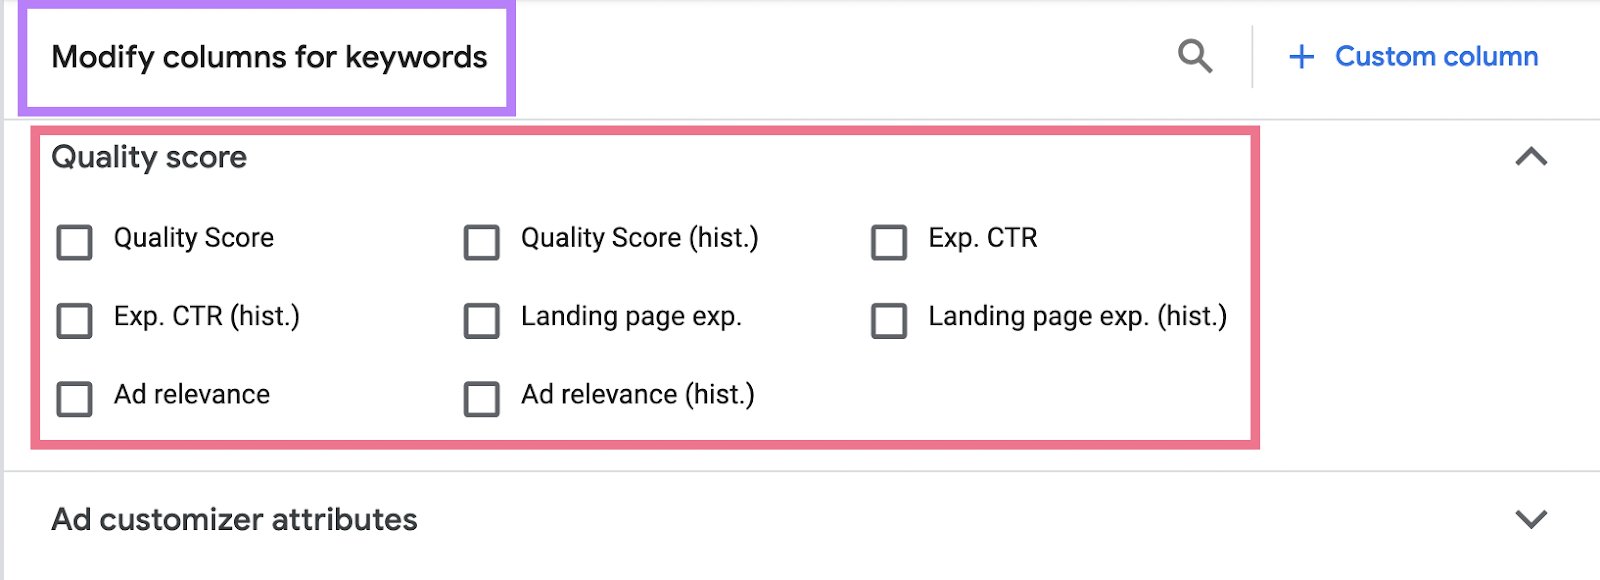 “Quality Score” section under “Modify columns for keywords”